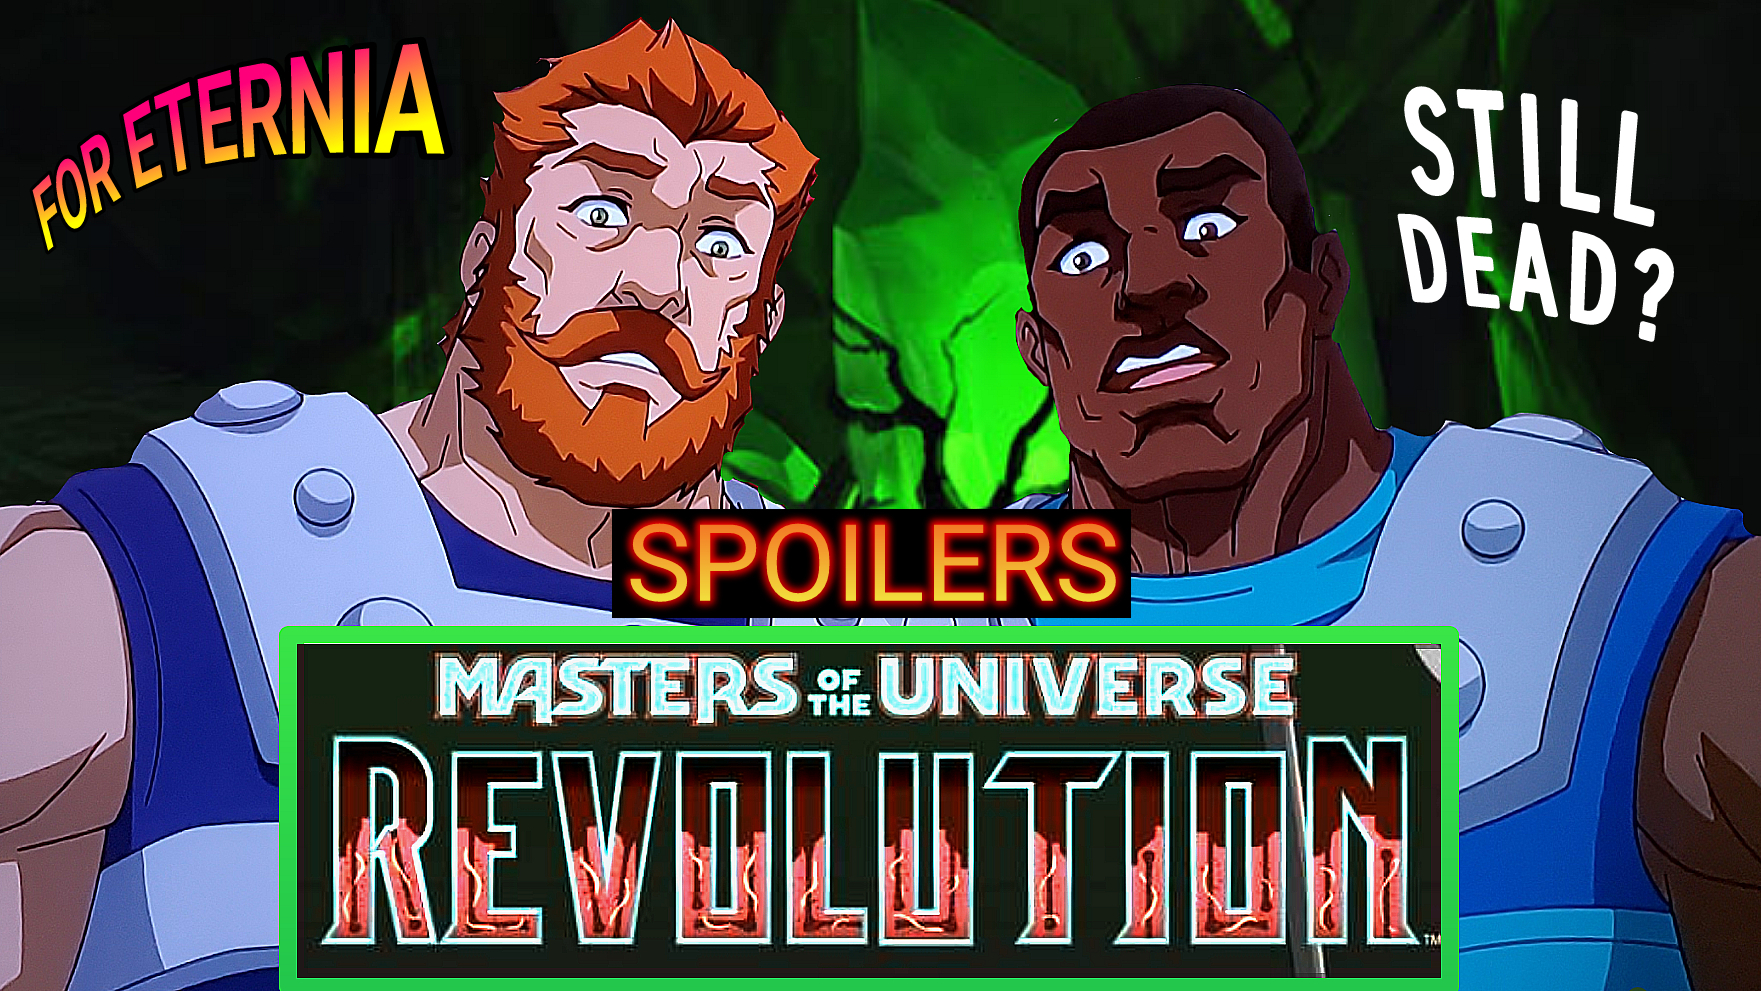 STILL DEAD? What becomes of Fisto and Clamp Champ in ”Masters of the Universe: Revolution”